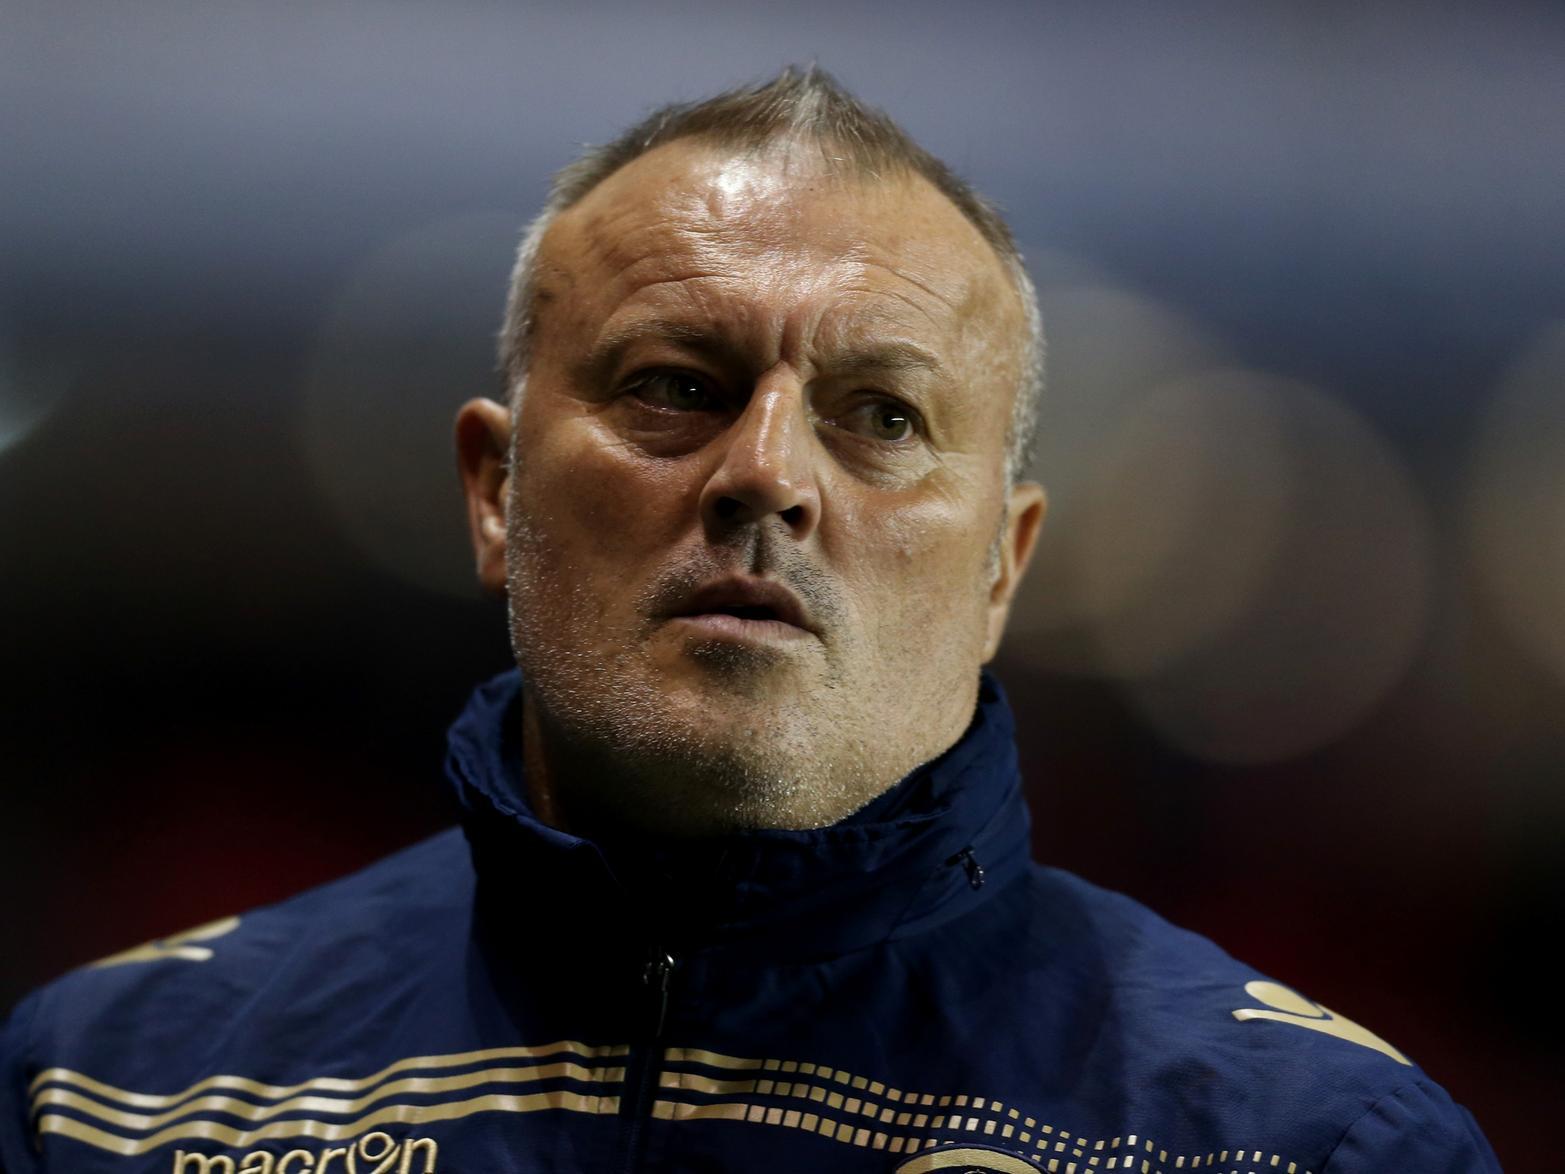 Many Leeds United fans were bitterly disappointed with how Redfearn was treated. He left the club fully in July 2015 after claiming that an offer to return to his old job in Leeds' academy was 'not genuine'. Redfearn had a stint at Liverpool Ladies, and quit as Newcastle United under-23s manager earlier this month.